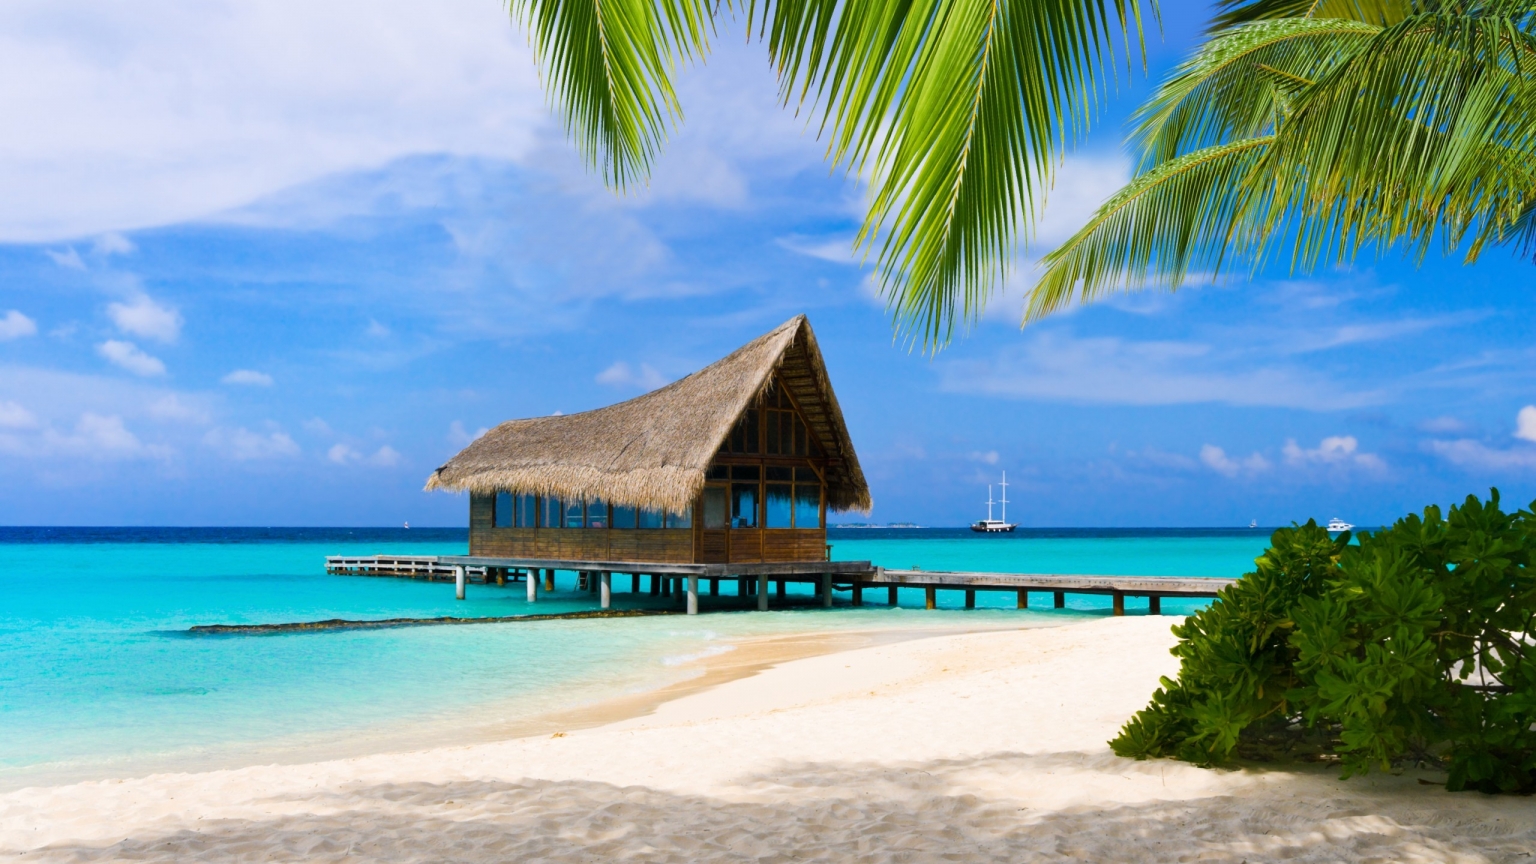 Bungalow in Maldives for 1536 x 864 HDTV resolution